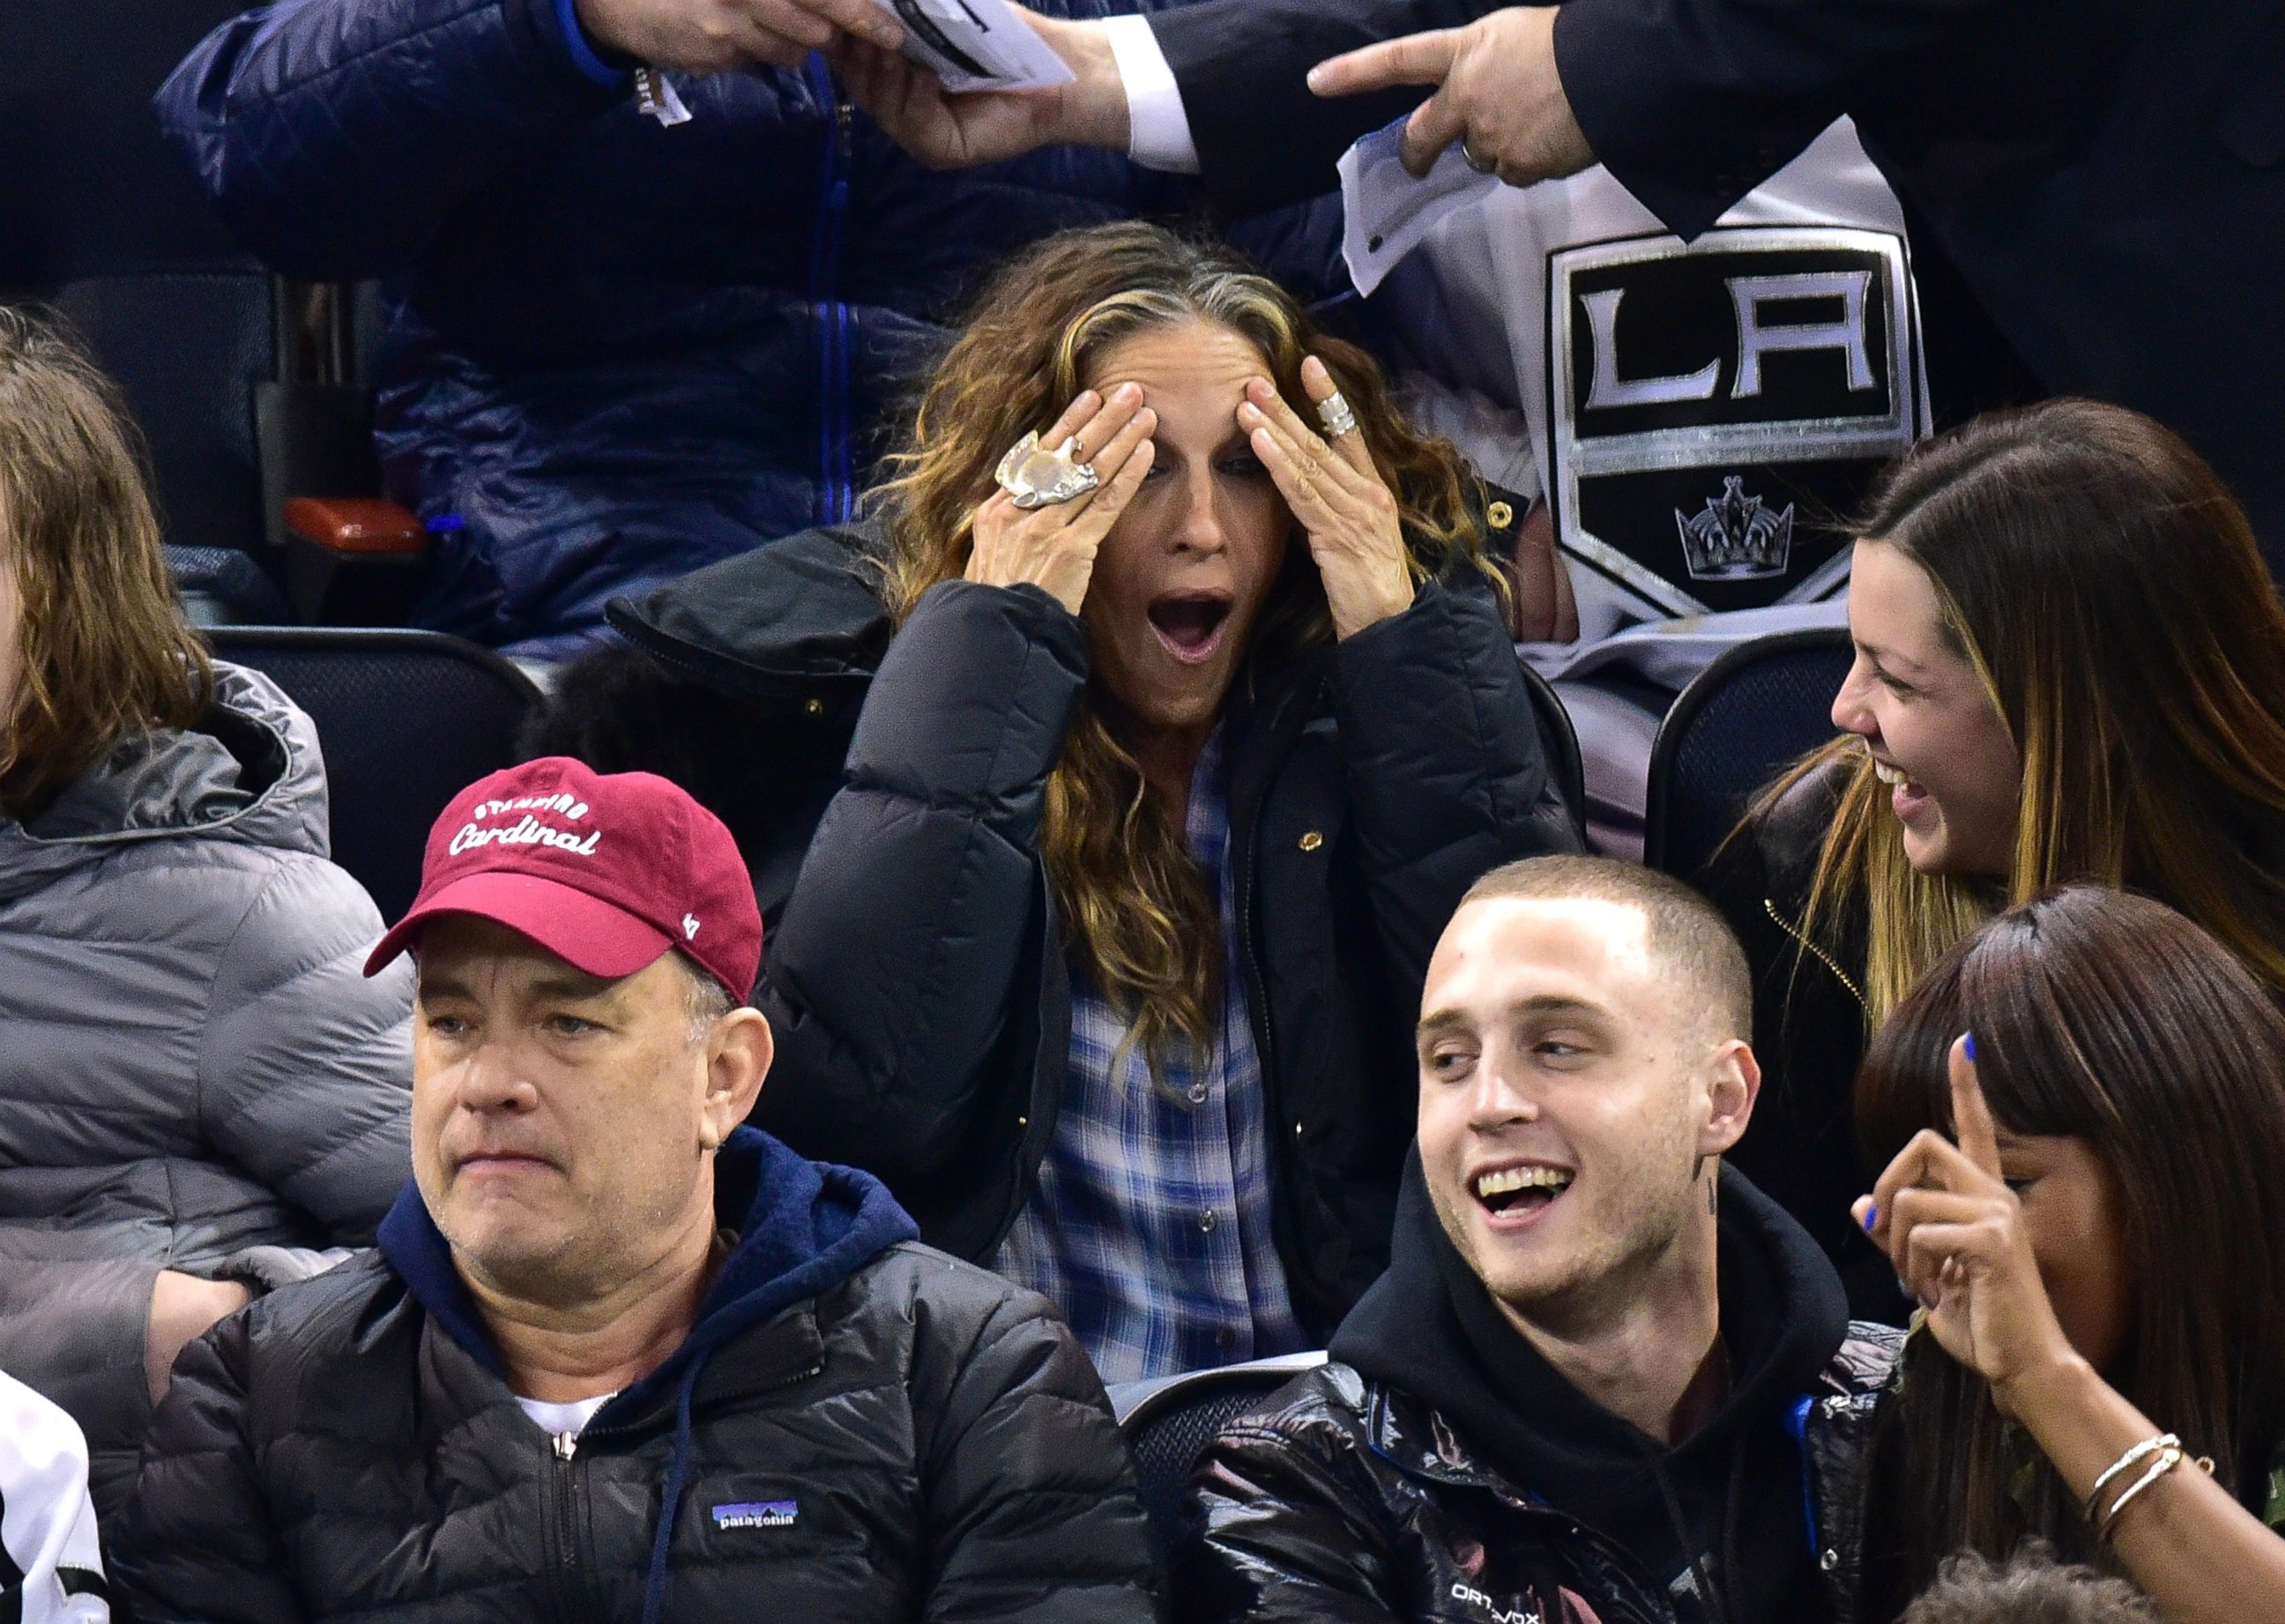 PHOTO: Tom Hanks and Sarah Jessica Parker attend the Los Angeles Kings vs New York Rangers game at Madison Square Garden on March 24, 2015 in New York City.